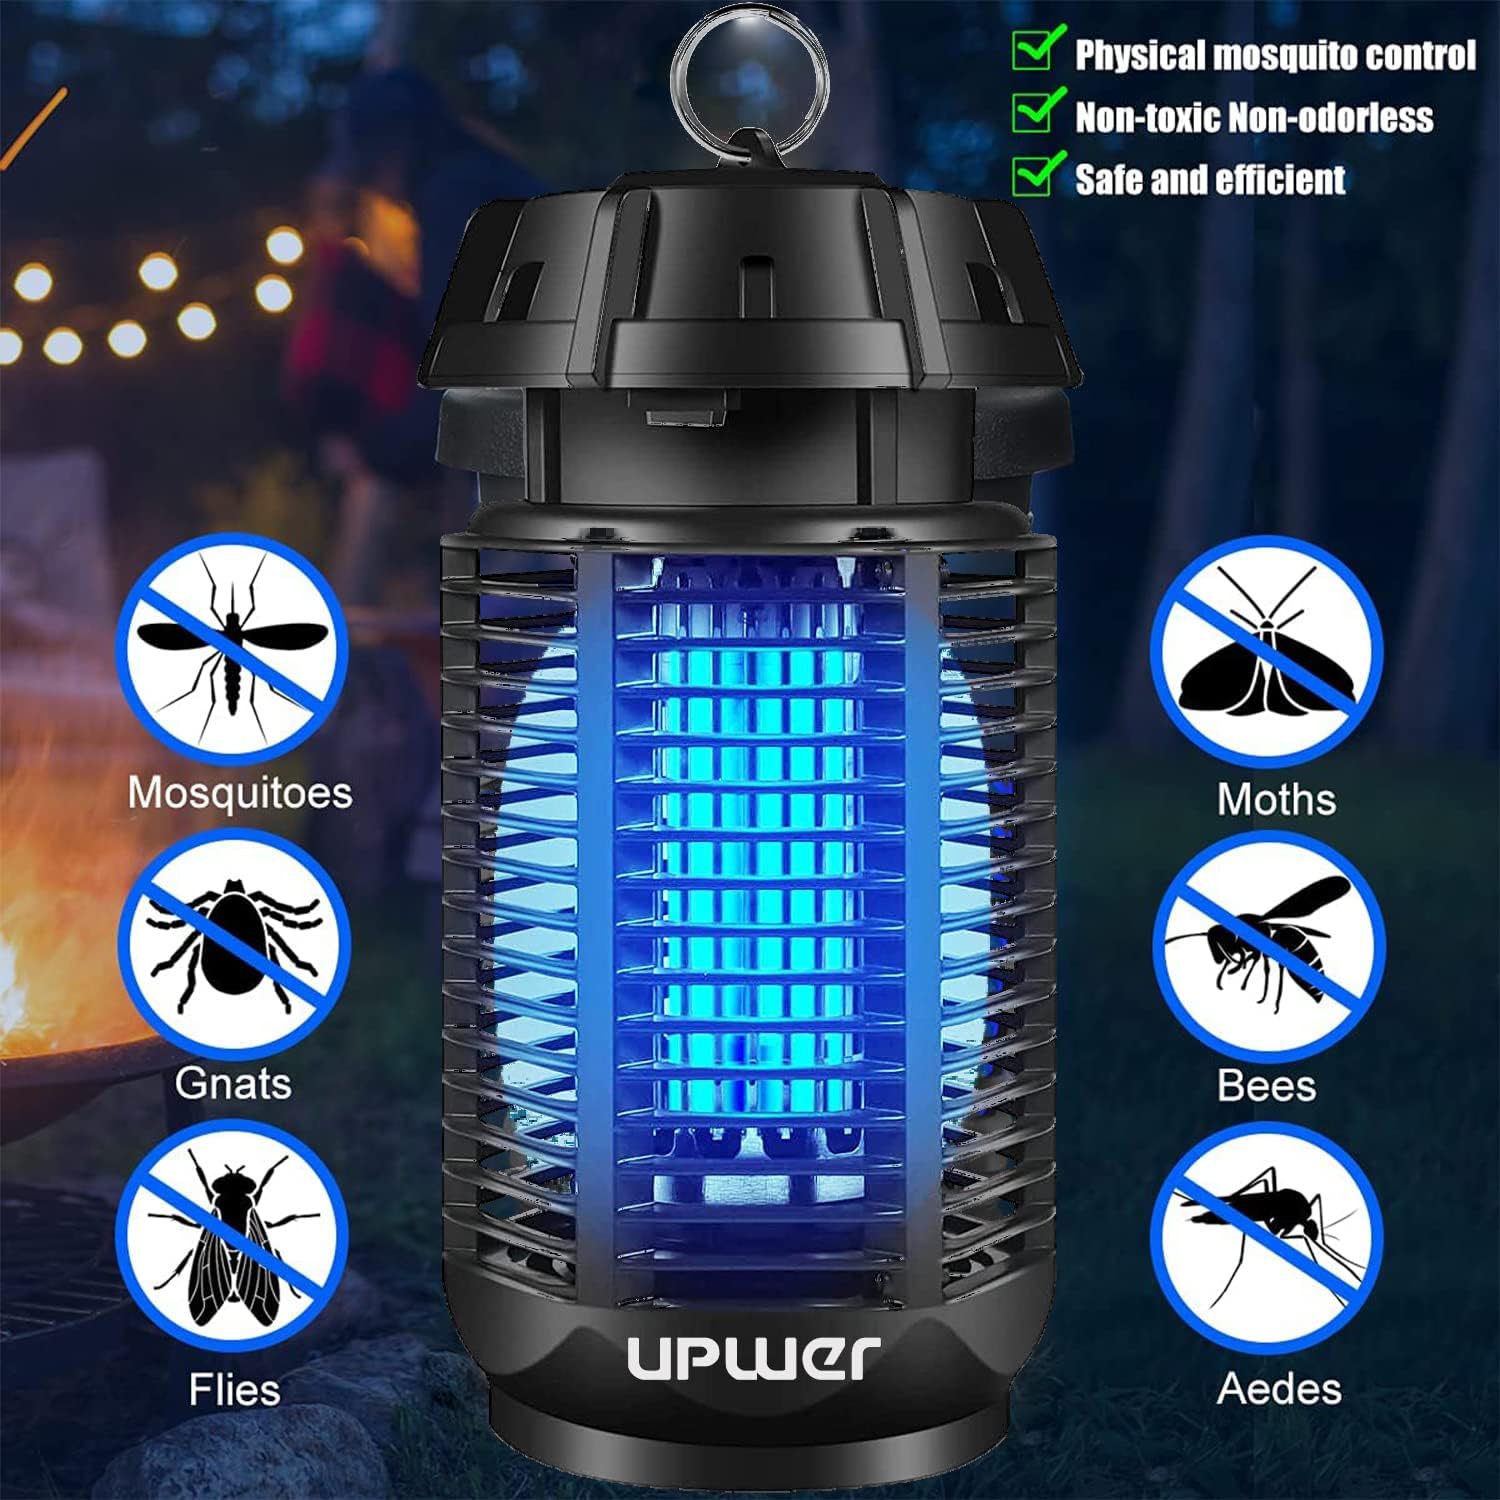 Electric Insect Killer, UV Mosquito Lamp, Eliminate Mosquito Moths